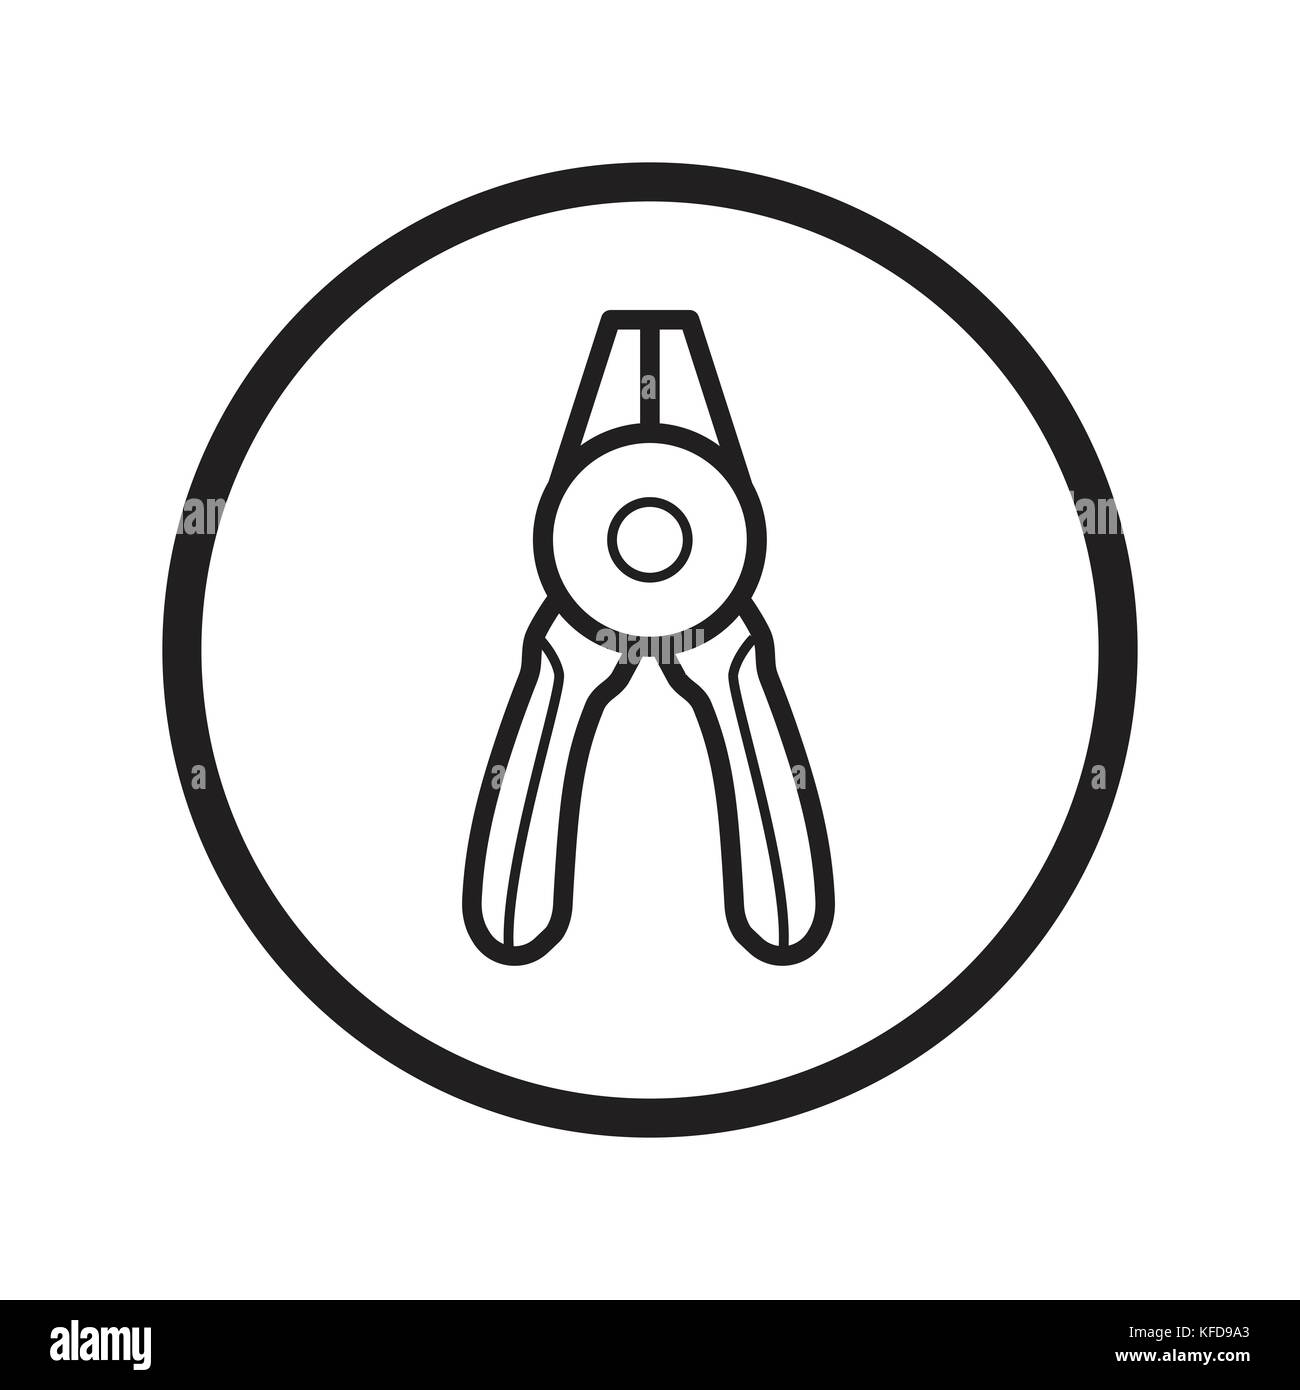 Linear Round nose pliers icon, Fix tools iconic symbol inside a circle, on white background. Vector Iconic Design. Stock Vector